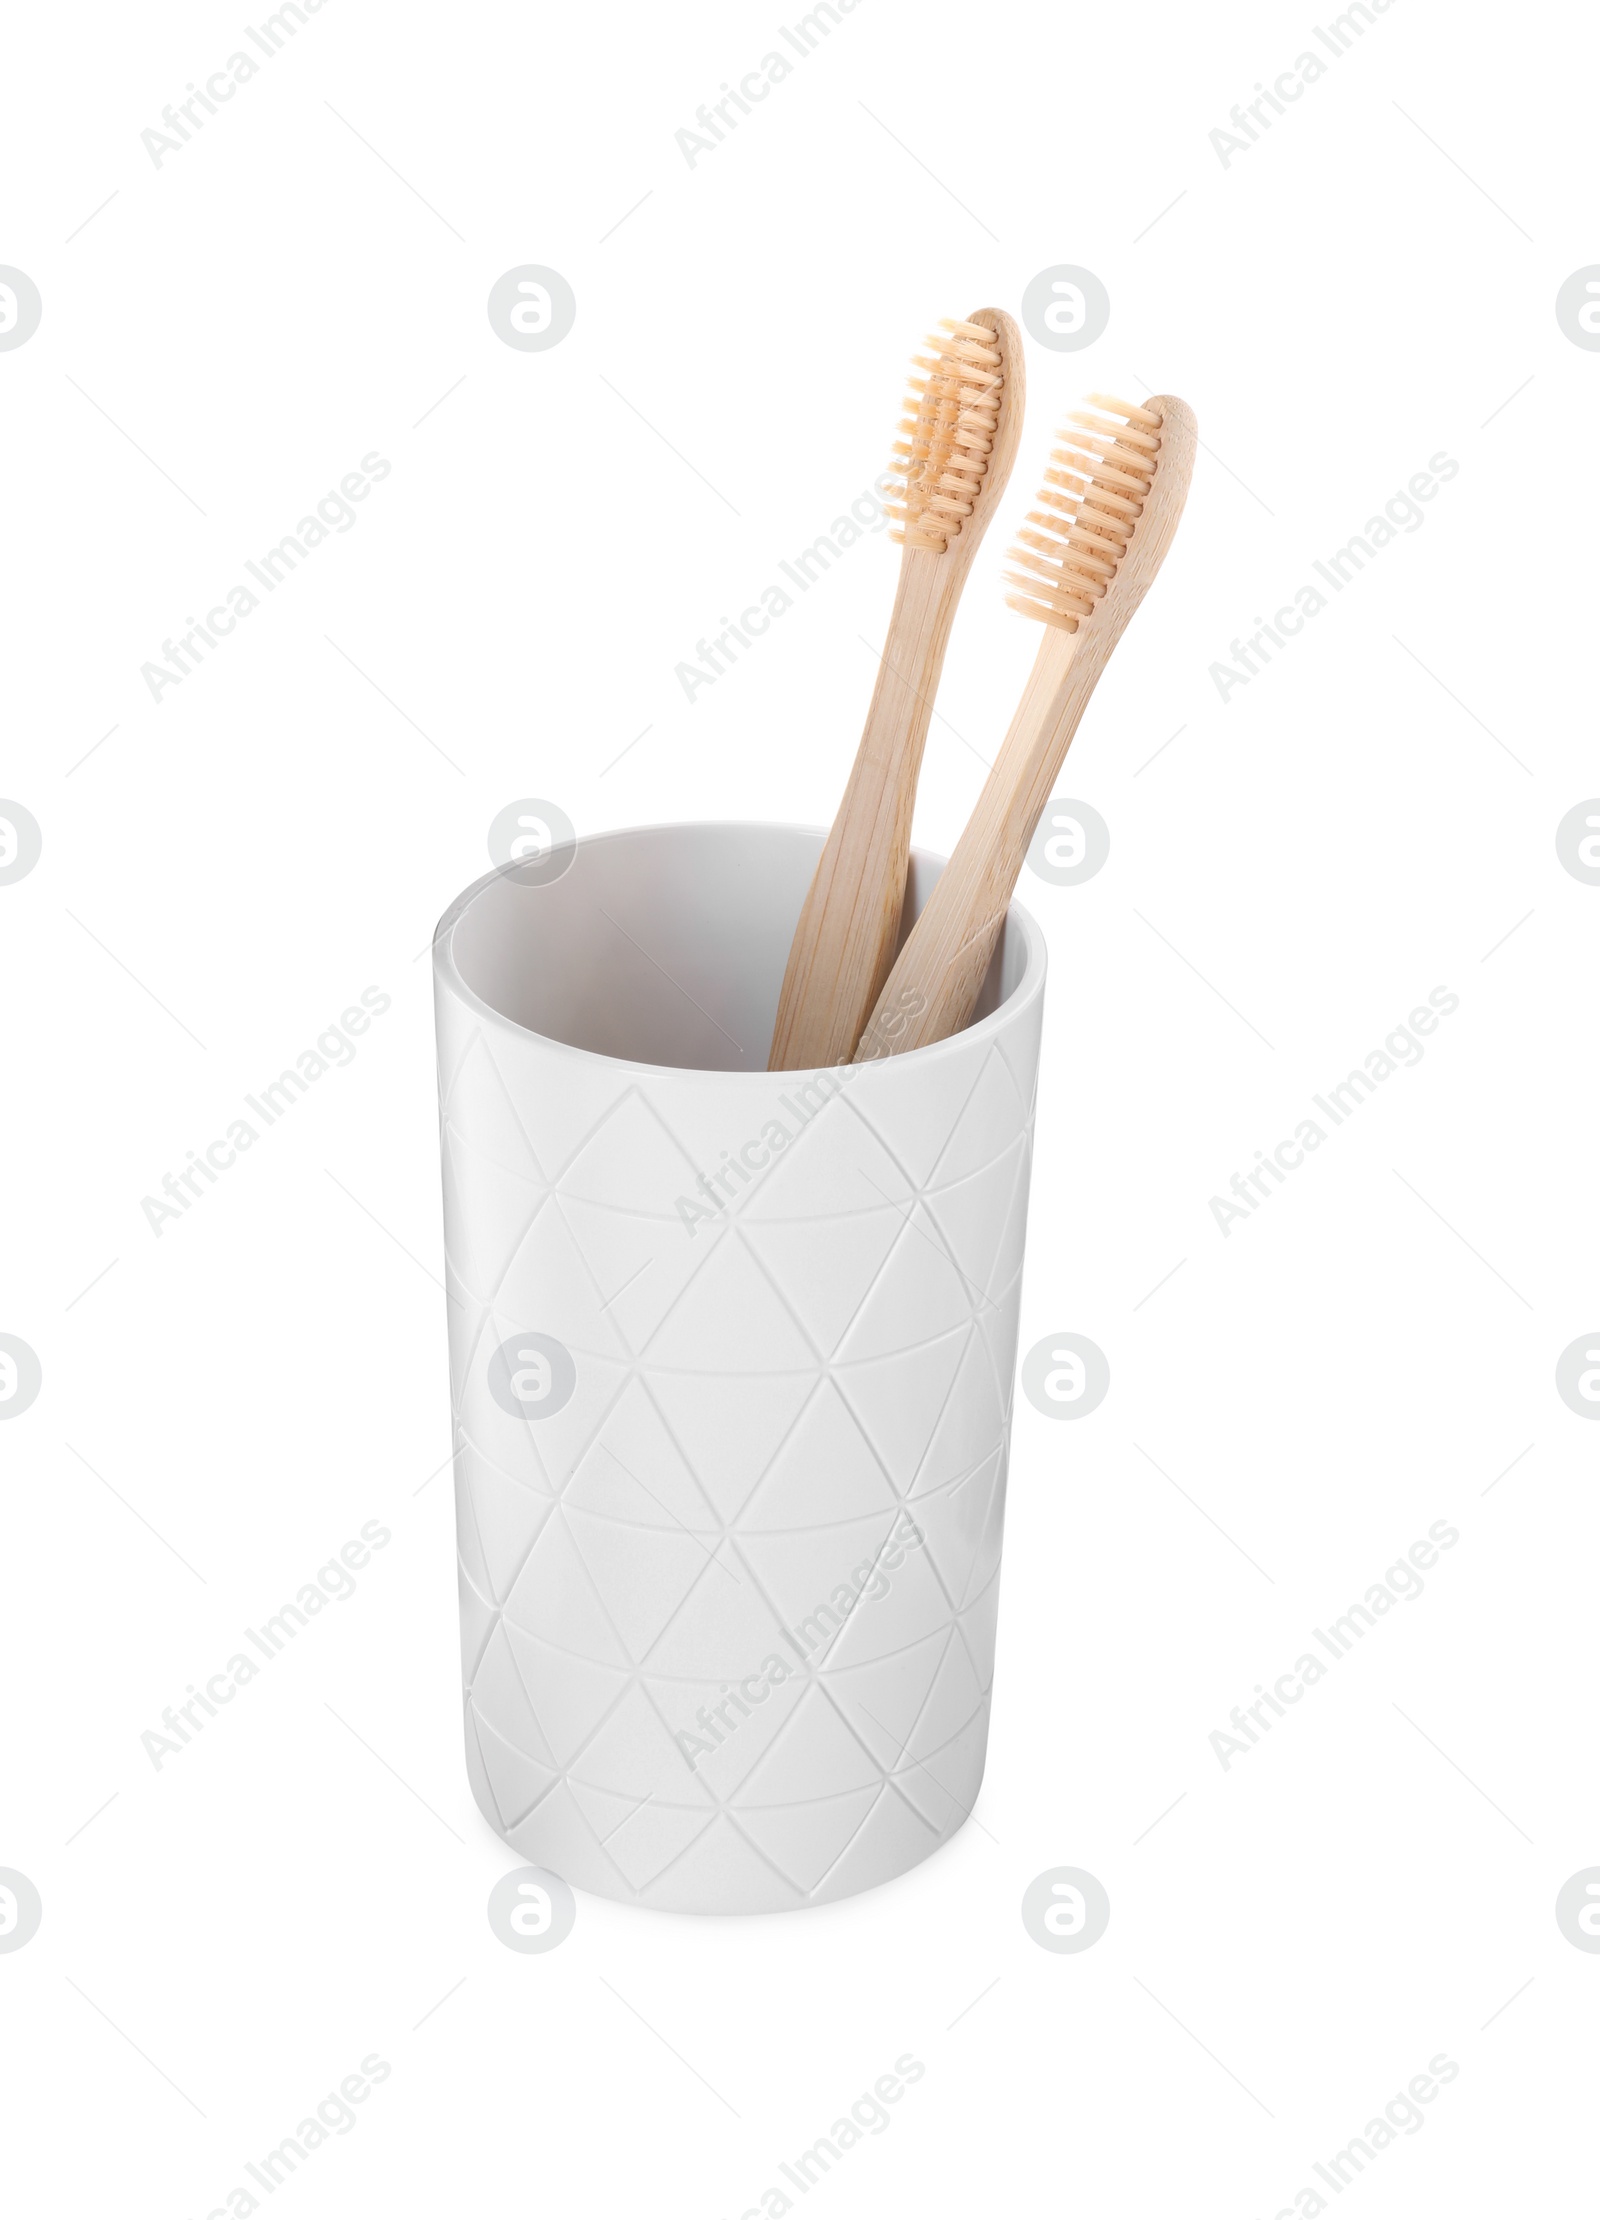 Photo of Bamboo toothbrushes in holder isolated on white